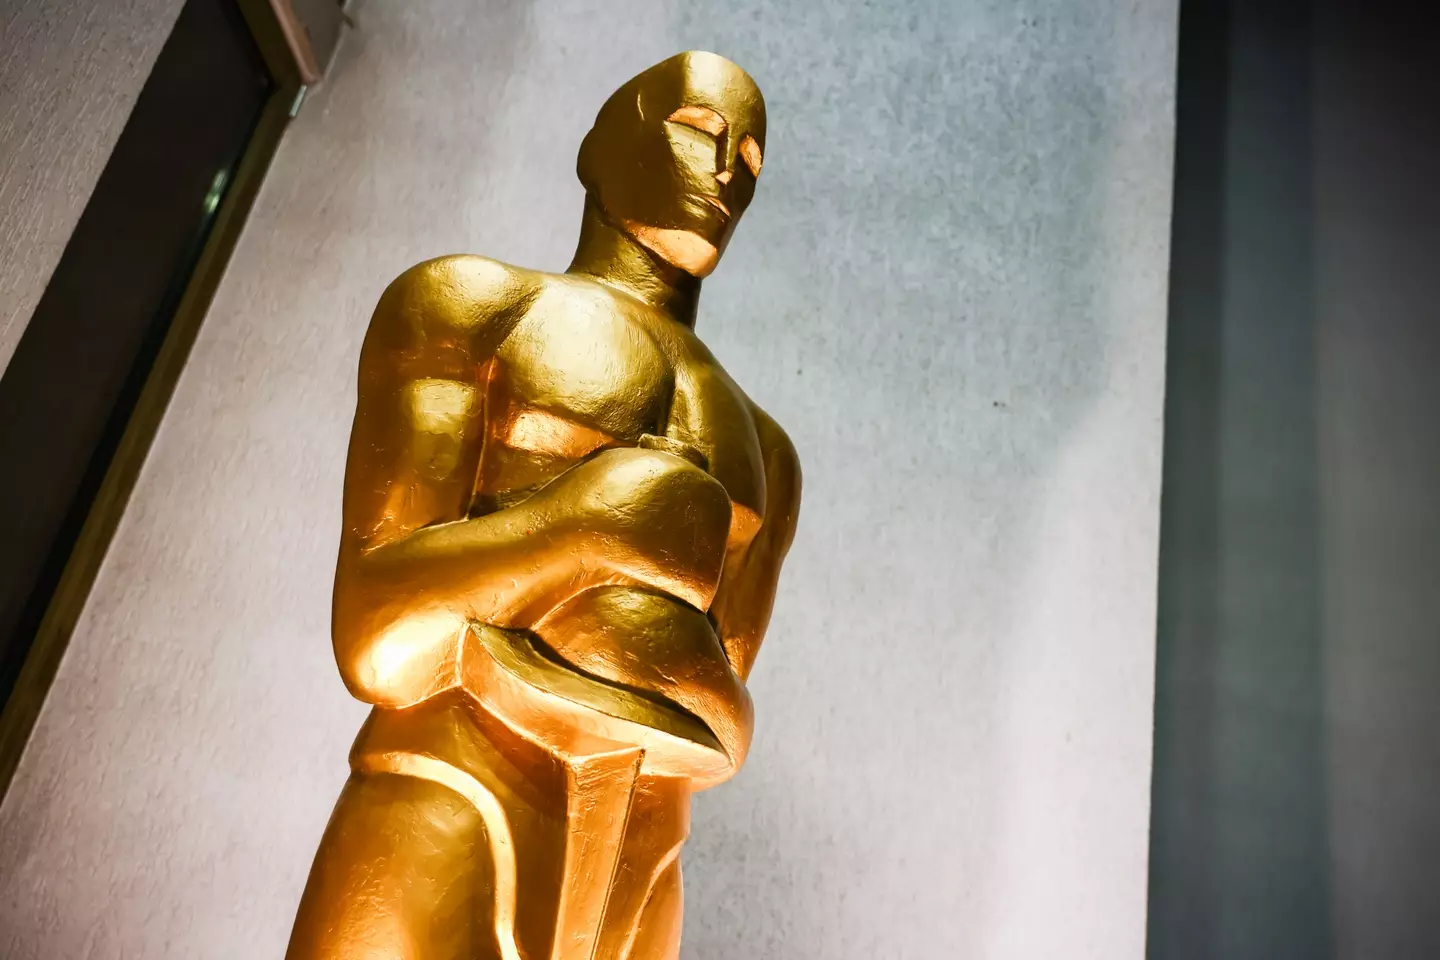 Statue of an Oscars trophy.